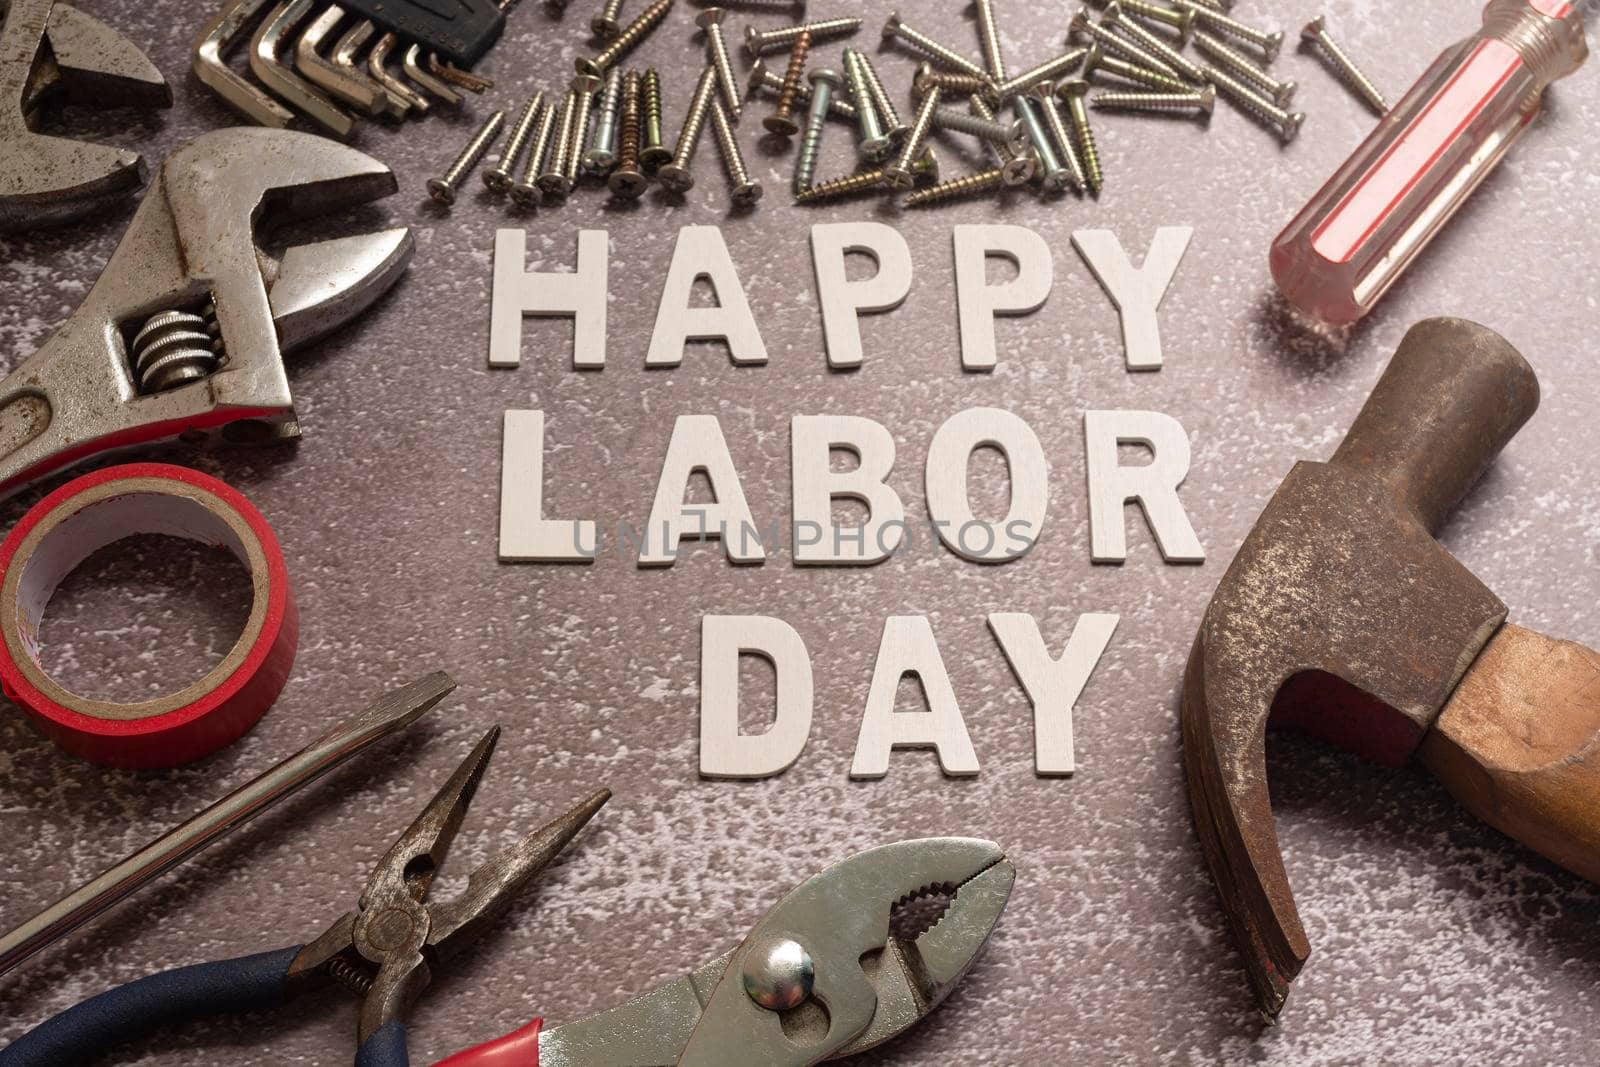 Happy labor day text with repair equipment and many handy tools on grunge grey concrete background